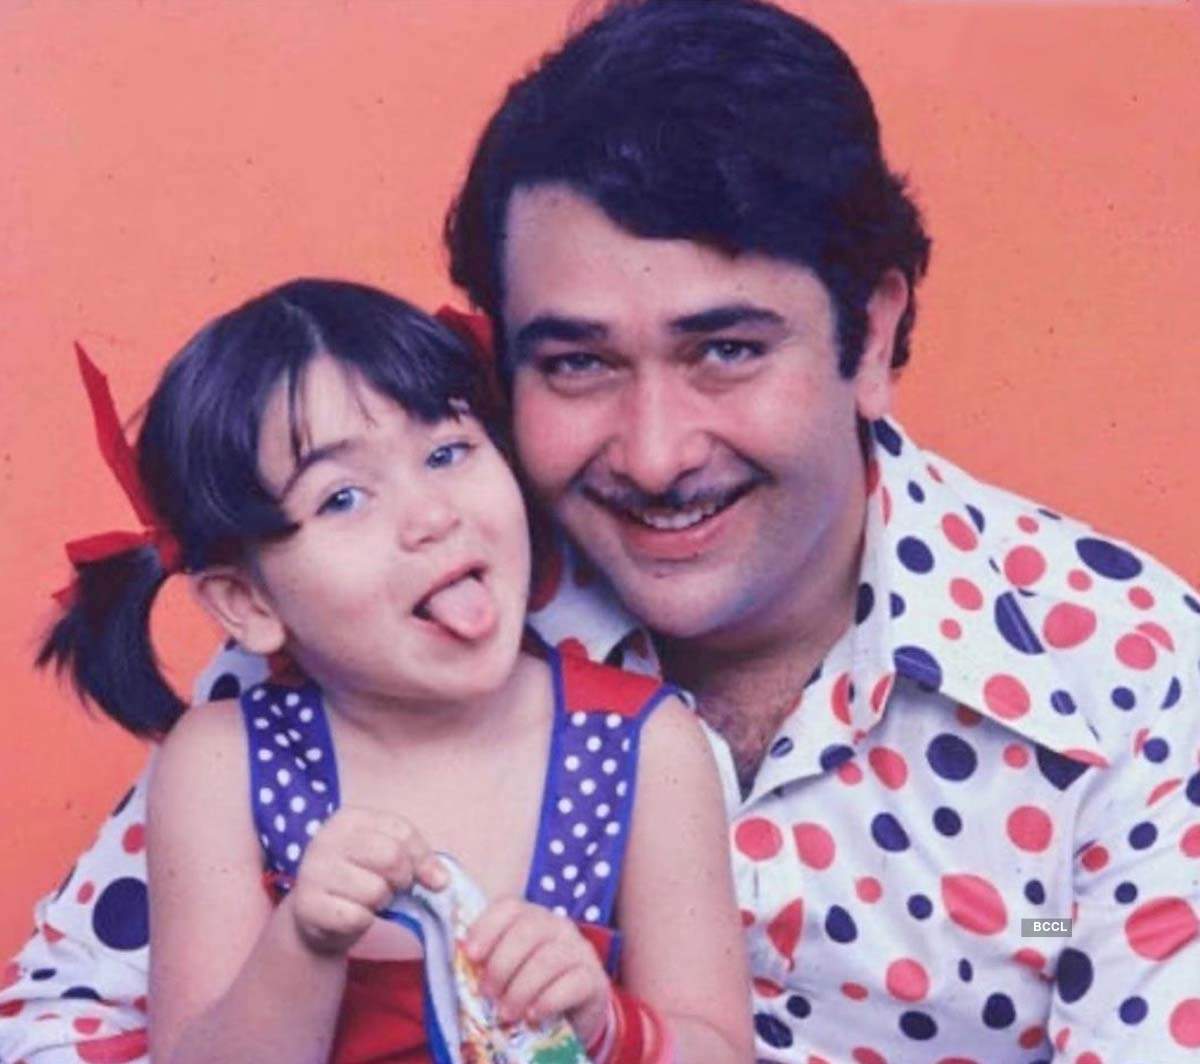 Childhood pictures of your favourite celebrities you don't want to give a miss!